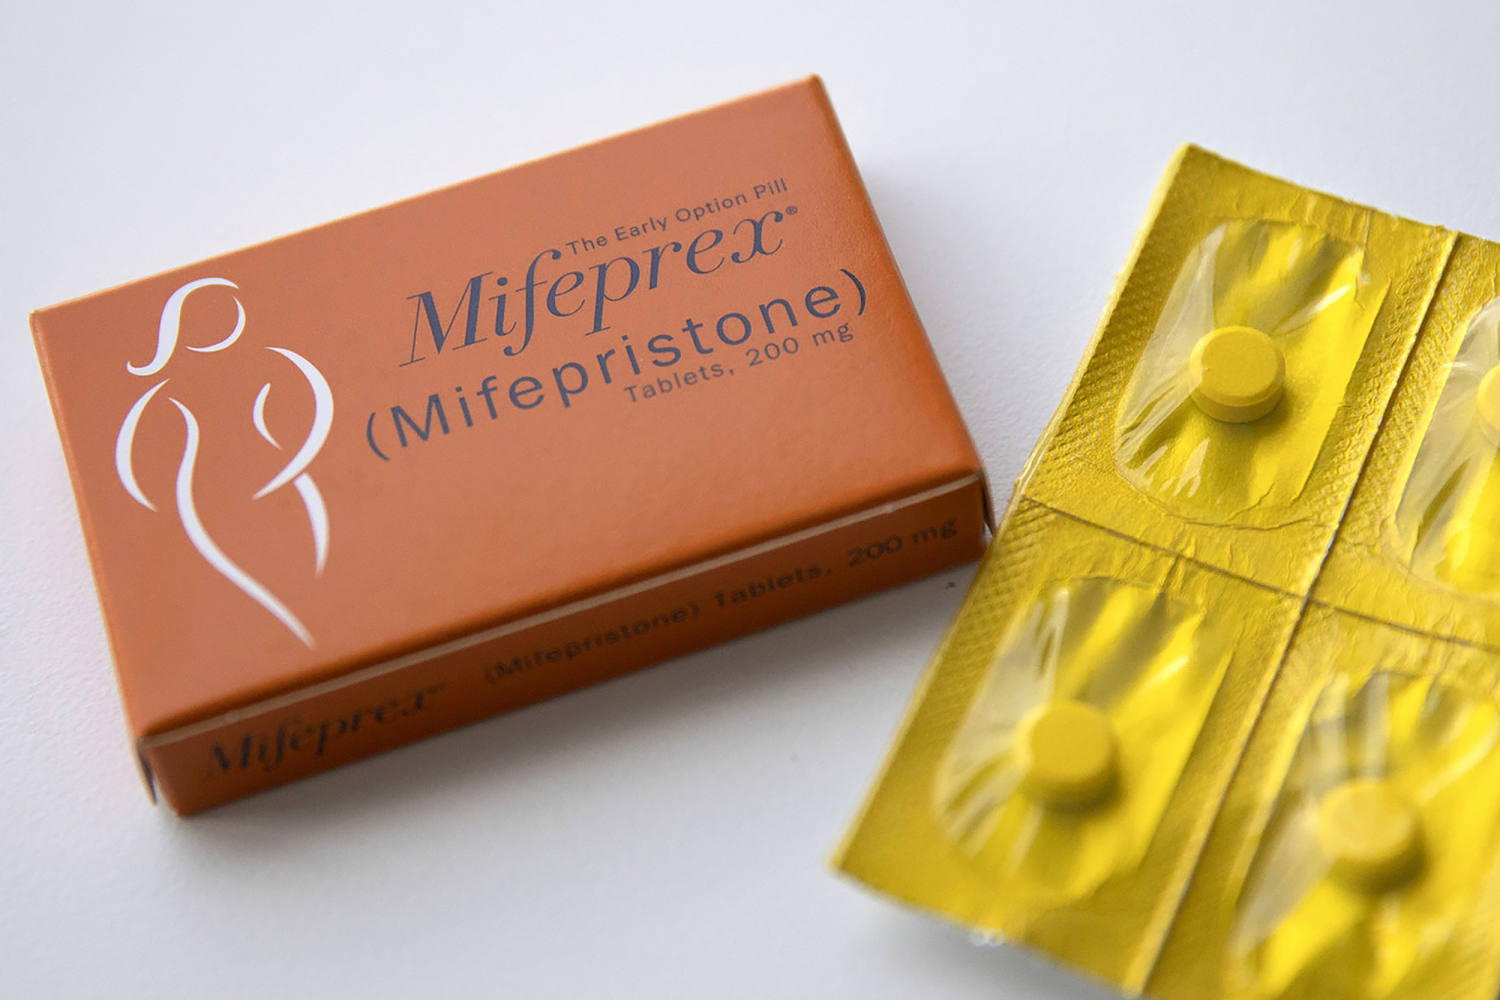 Abortion pill access could still face challenges after Supreme Court decision